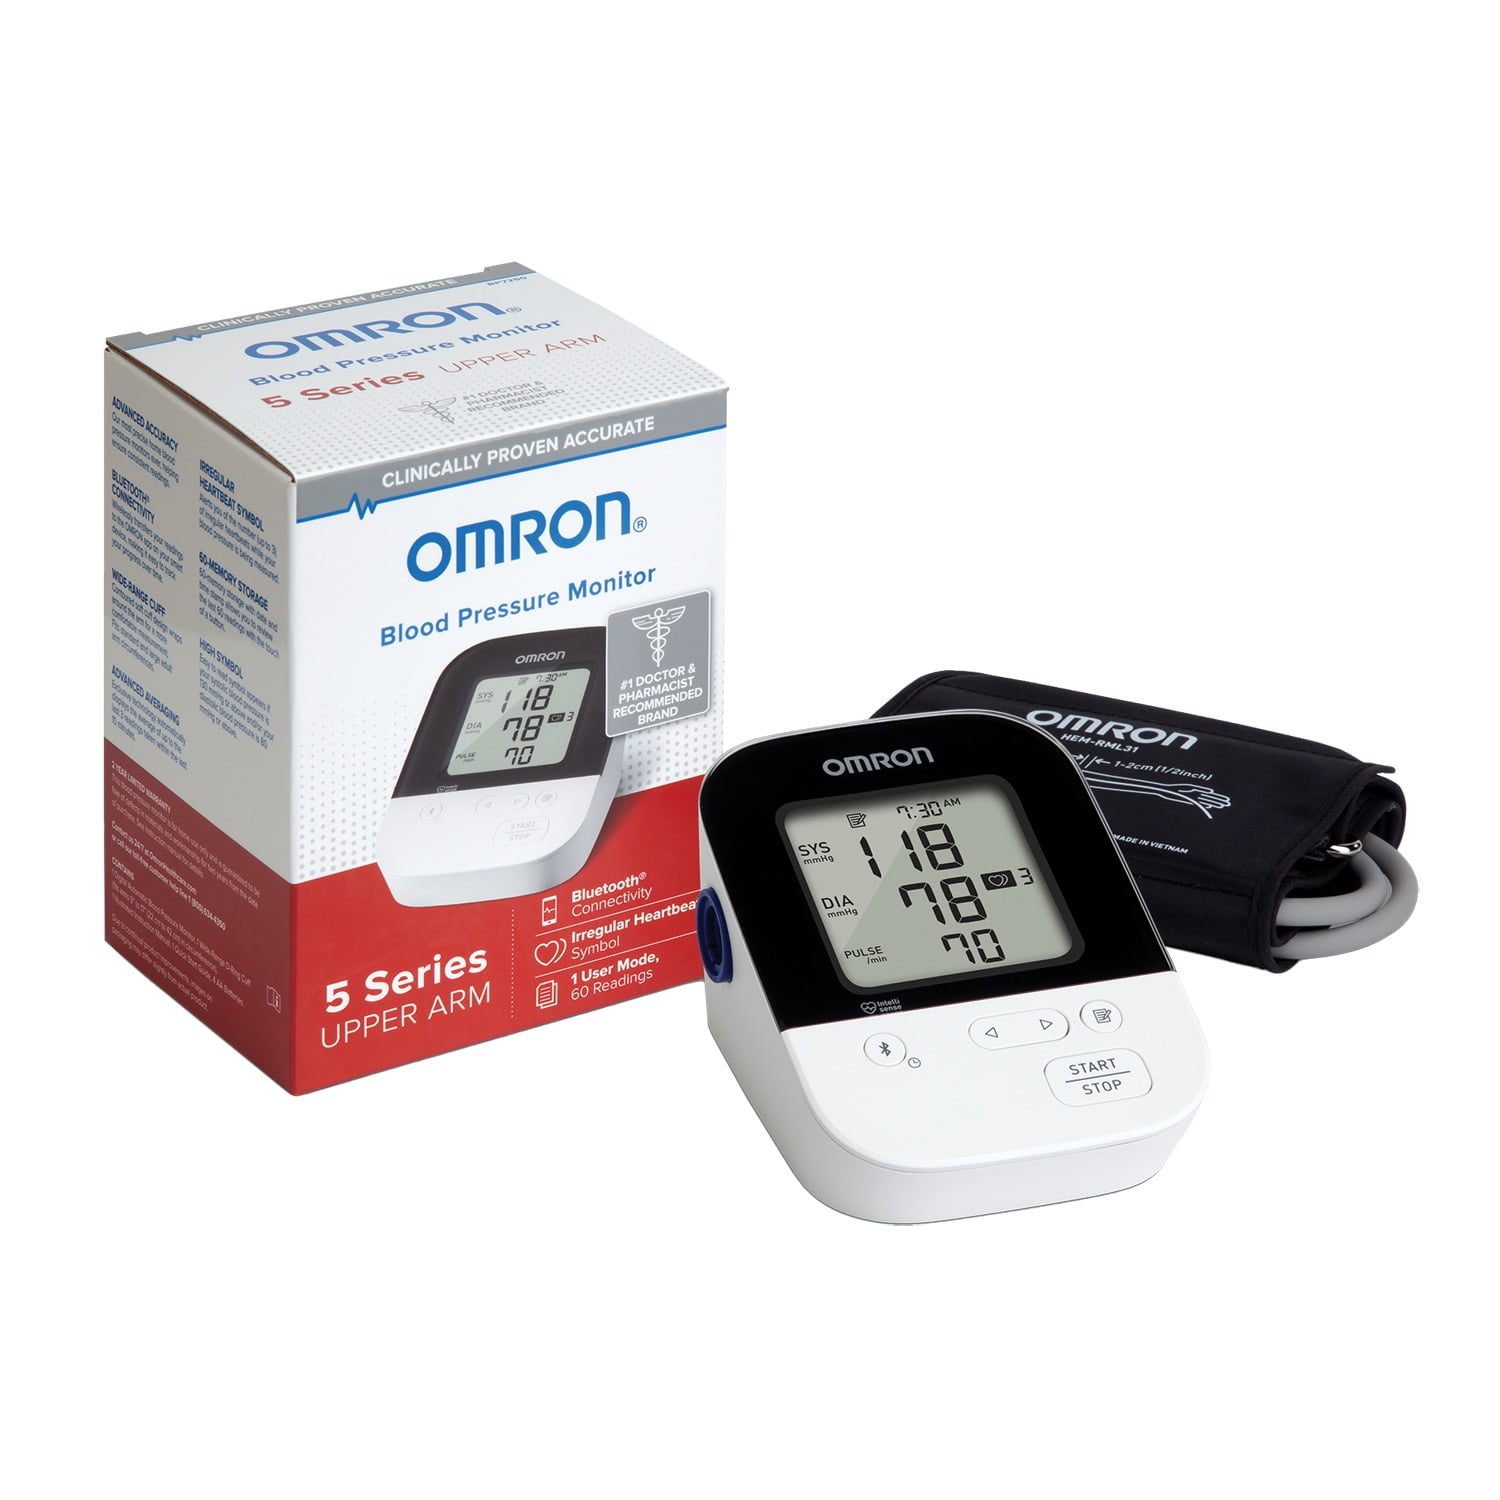 Physician review of the Omron bluetooth blood pressure monitor